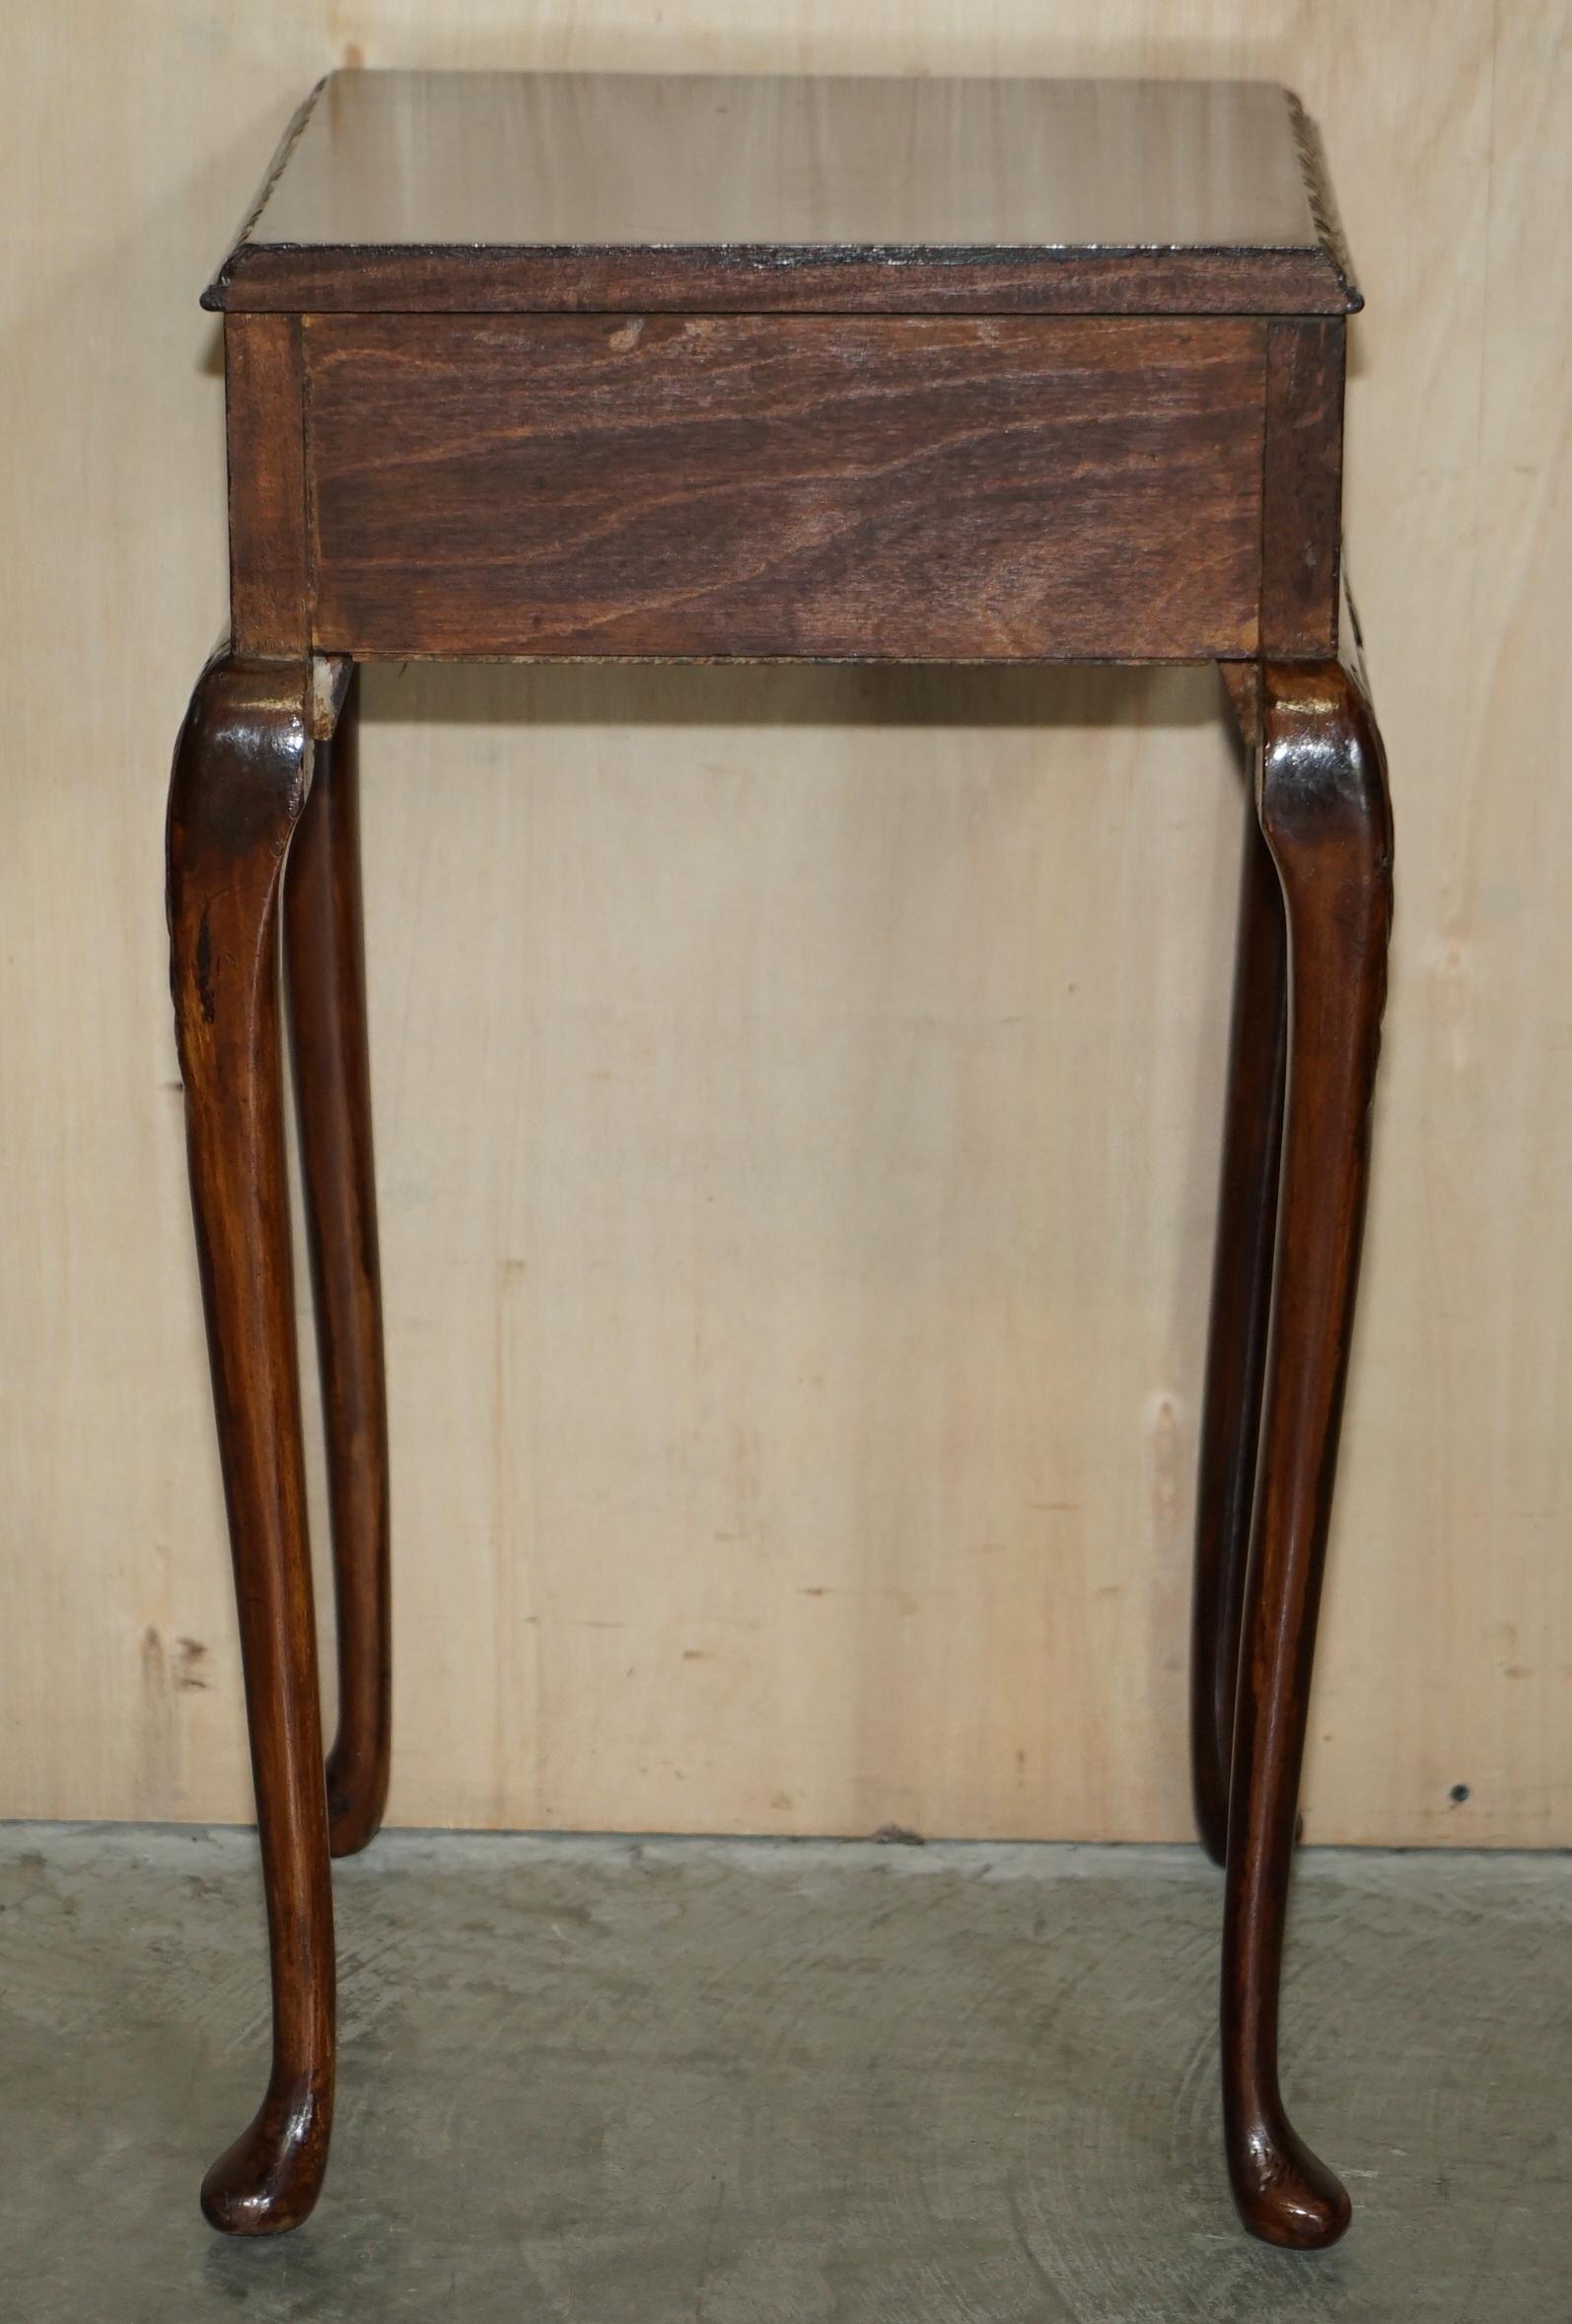 PAIR OF ANTIQUE VICTORIAN ELEGANT CABRIOLE LEGGED SINGLE DRAWER TALL SiDE TABLES For Sale 7